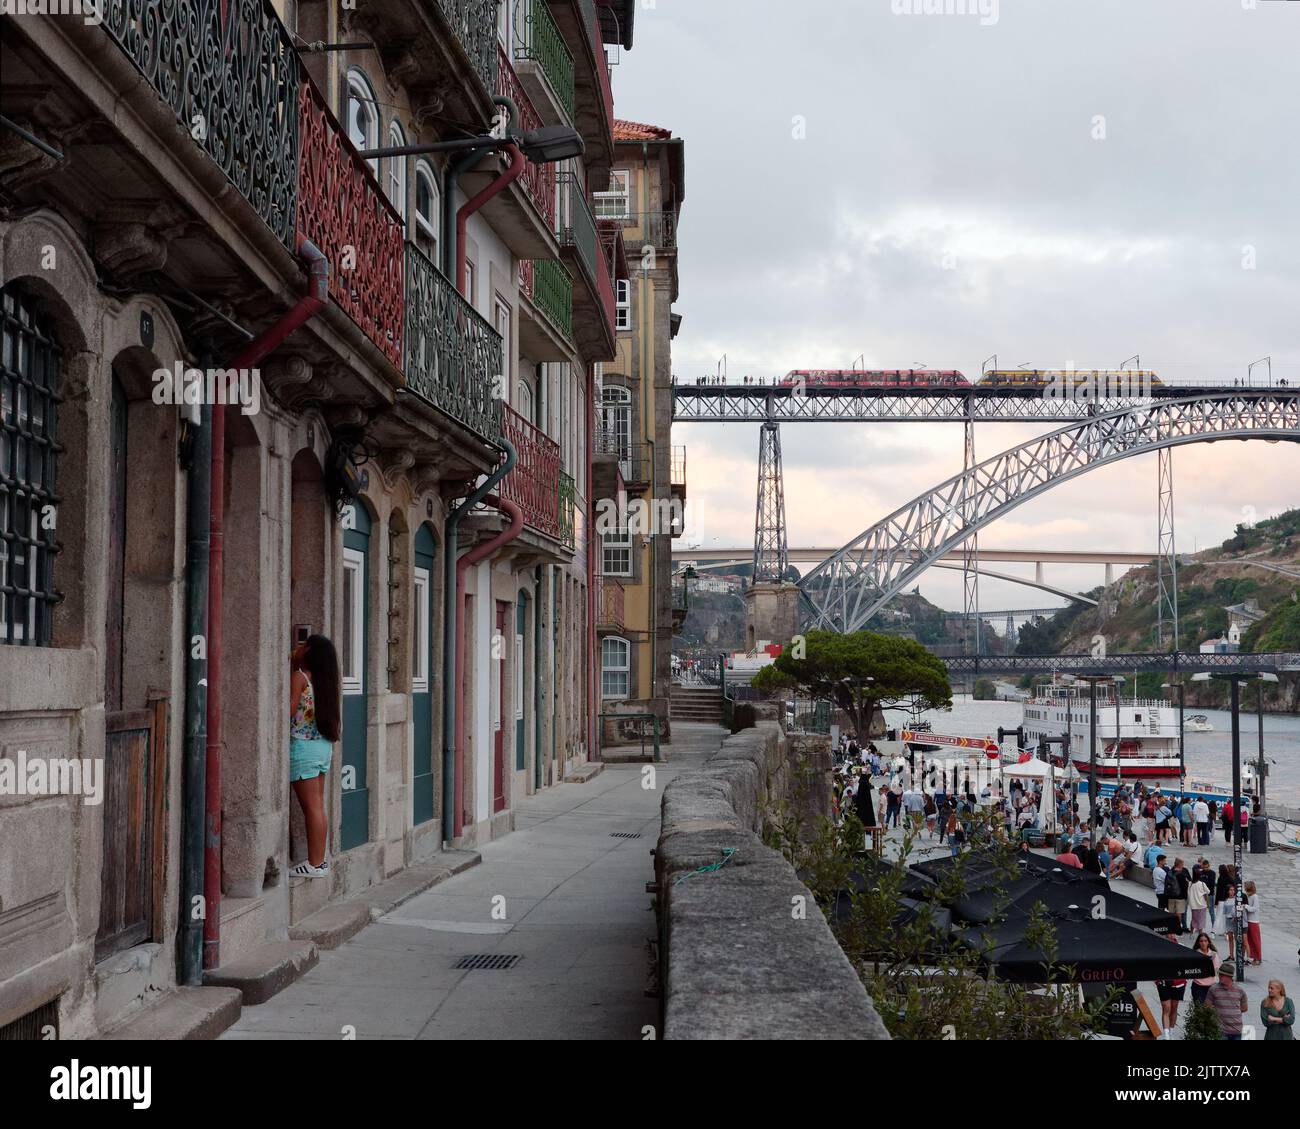 Properties with balconies on a raised walkway in the Riberia district of Porto with the Douro river and a metro train on the Luis I bridge. Portugal Stock Photo